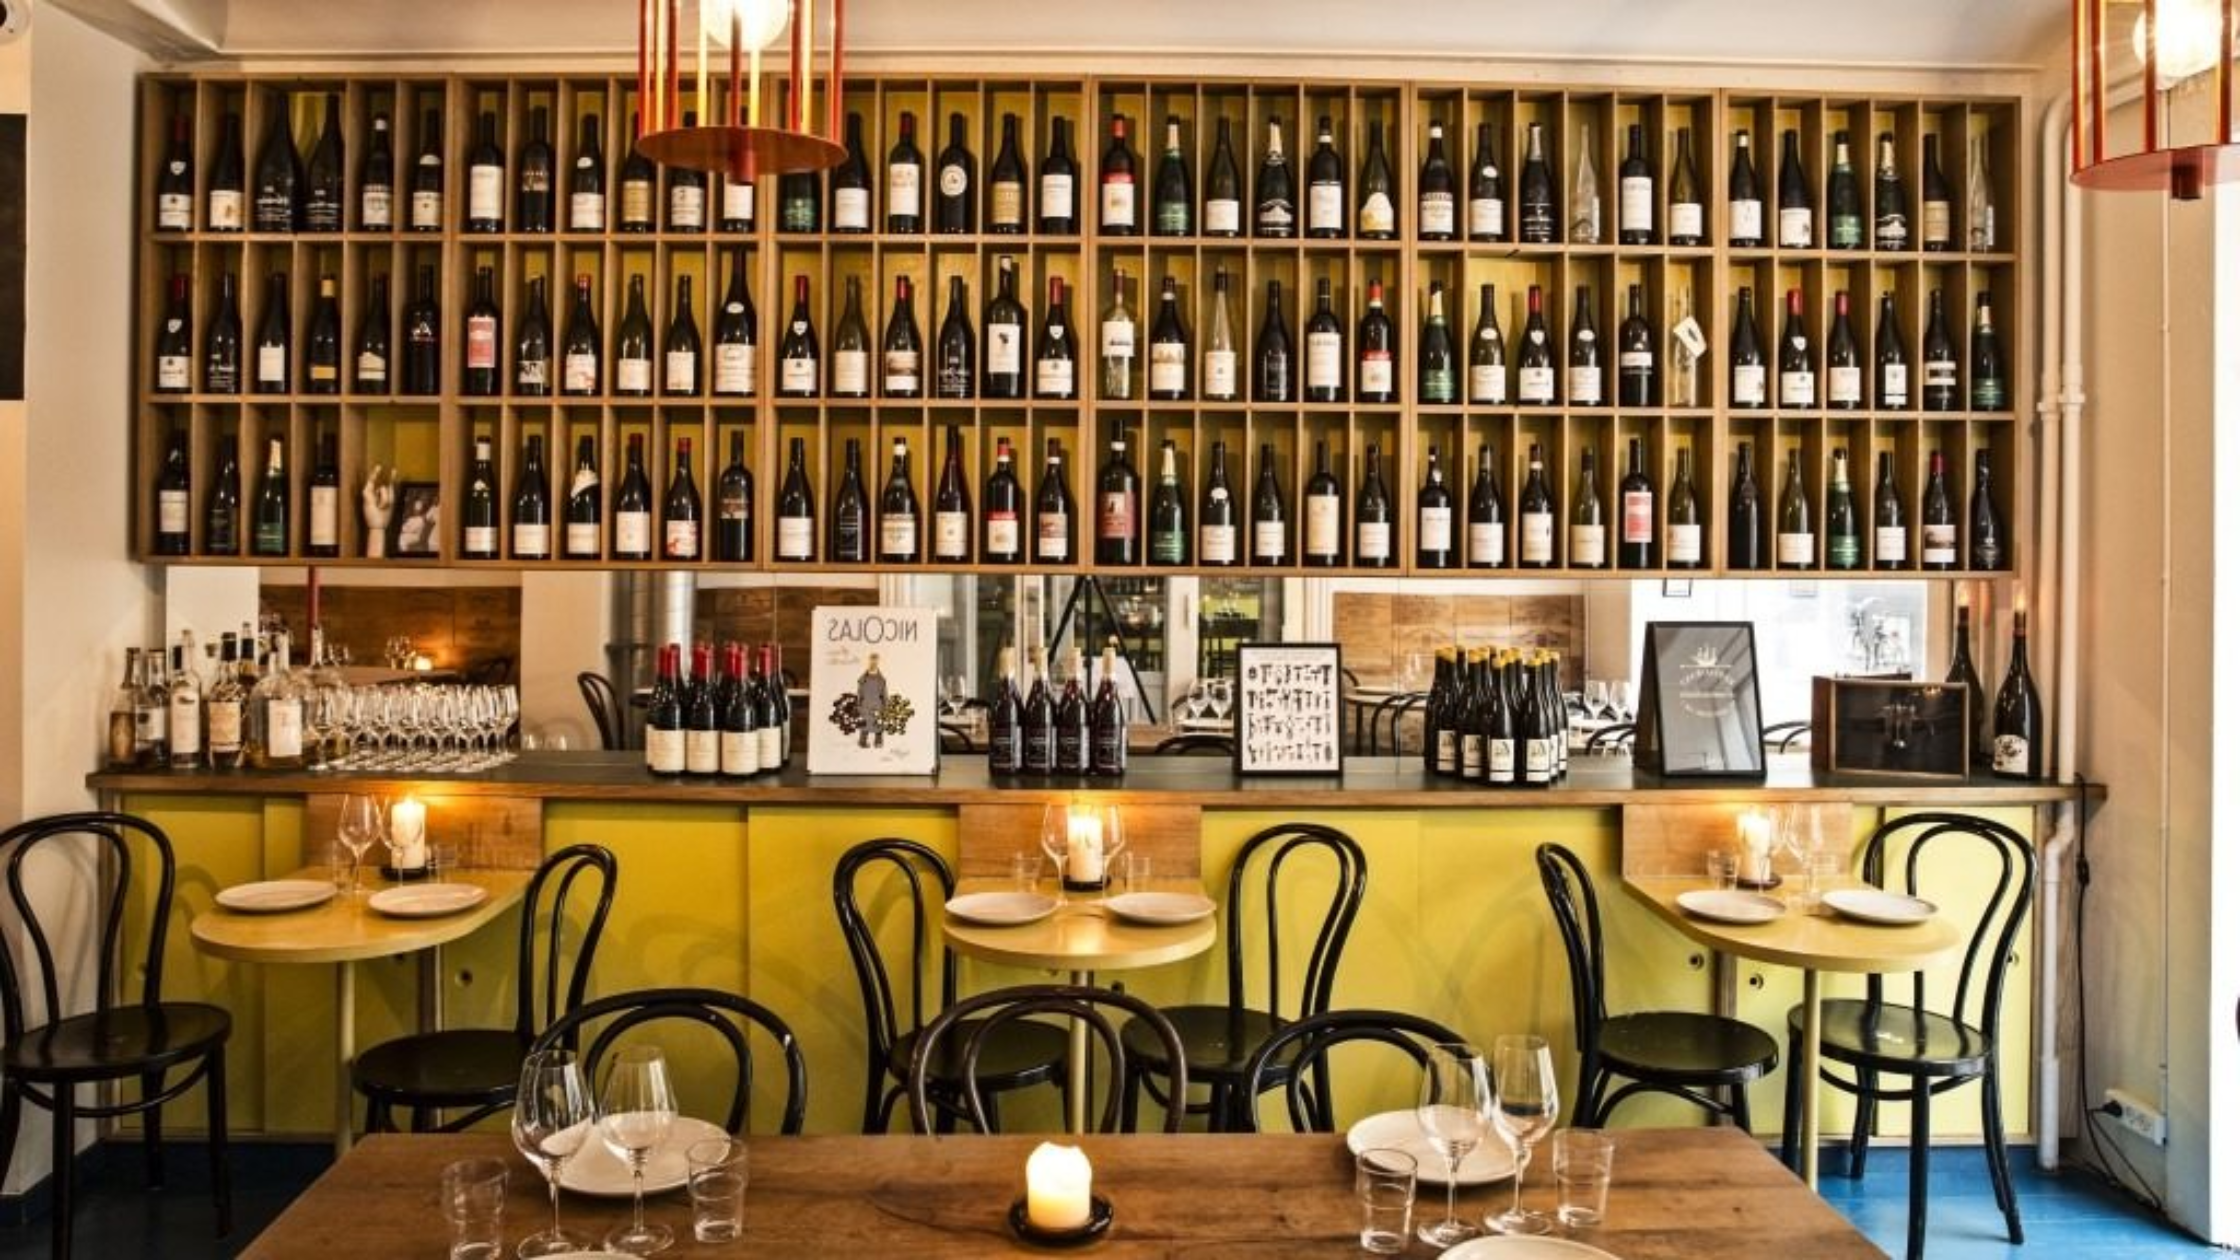 The Best Natural Wine Bars in London